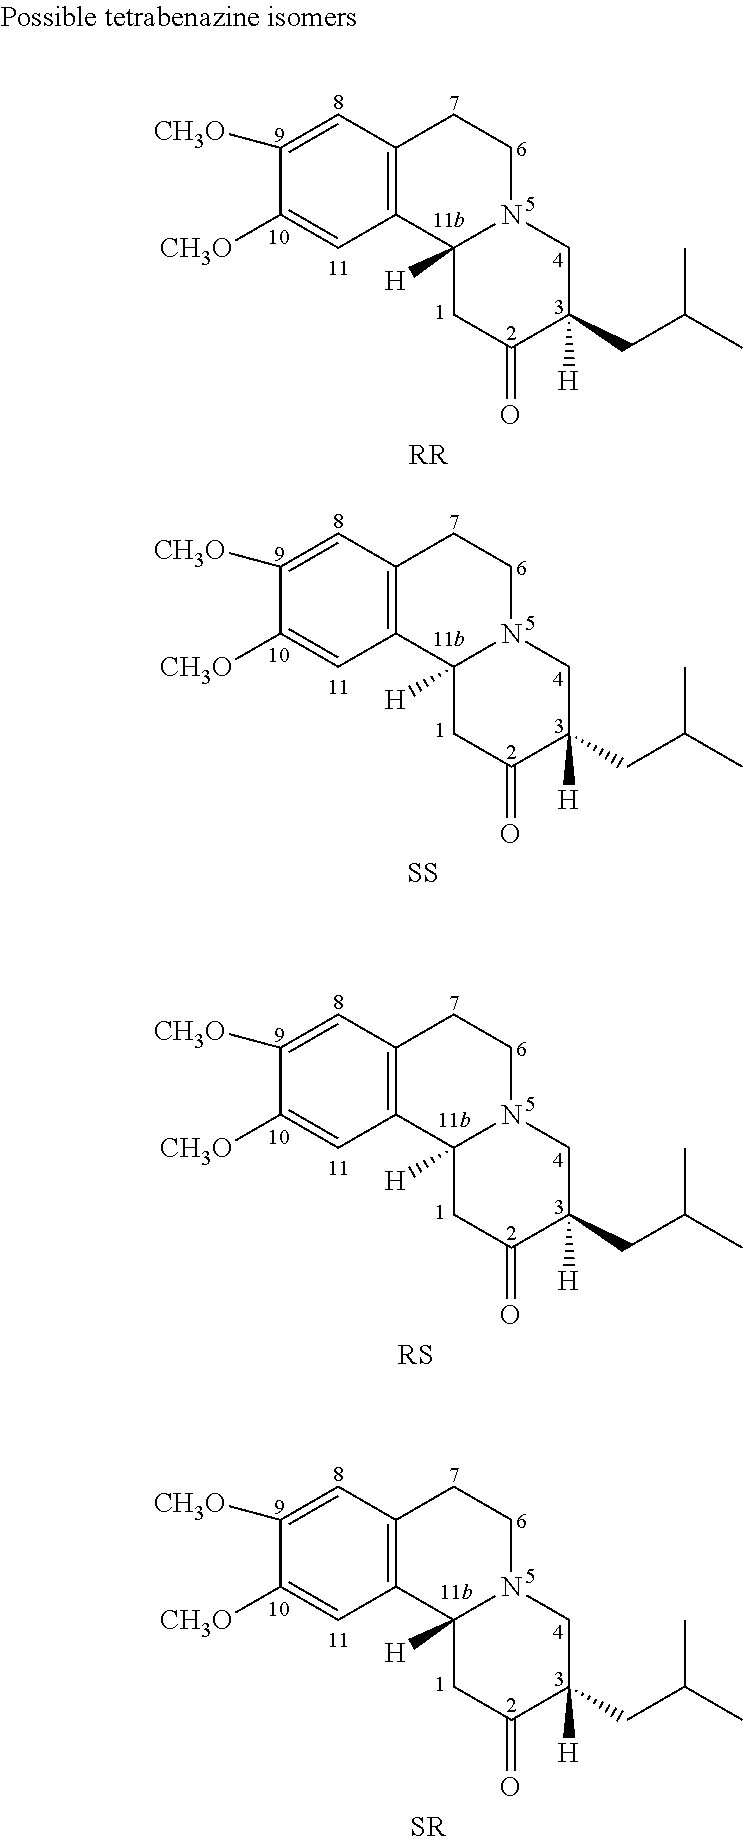 Dihydrotetrabenazine for the treatment of anxiety and psychoses